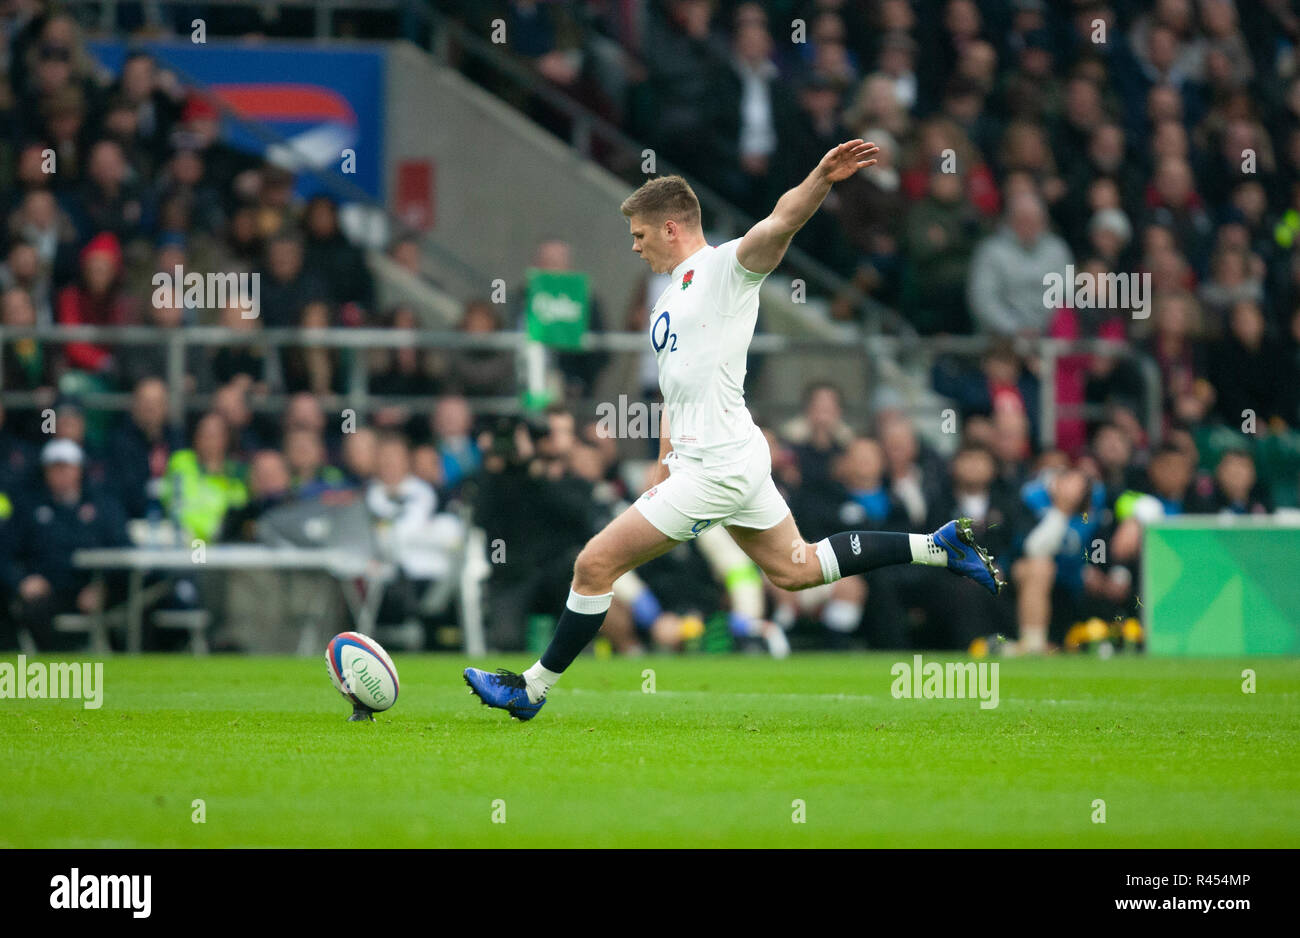 Twickenham, UK. 24th November 2018. England's Owen Farrell kicks a penalty during the Quilter International Rugby match between England and Australia. Andrew Taylor/Alamy Live News Stock Photo